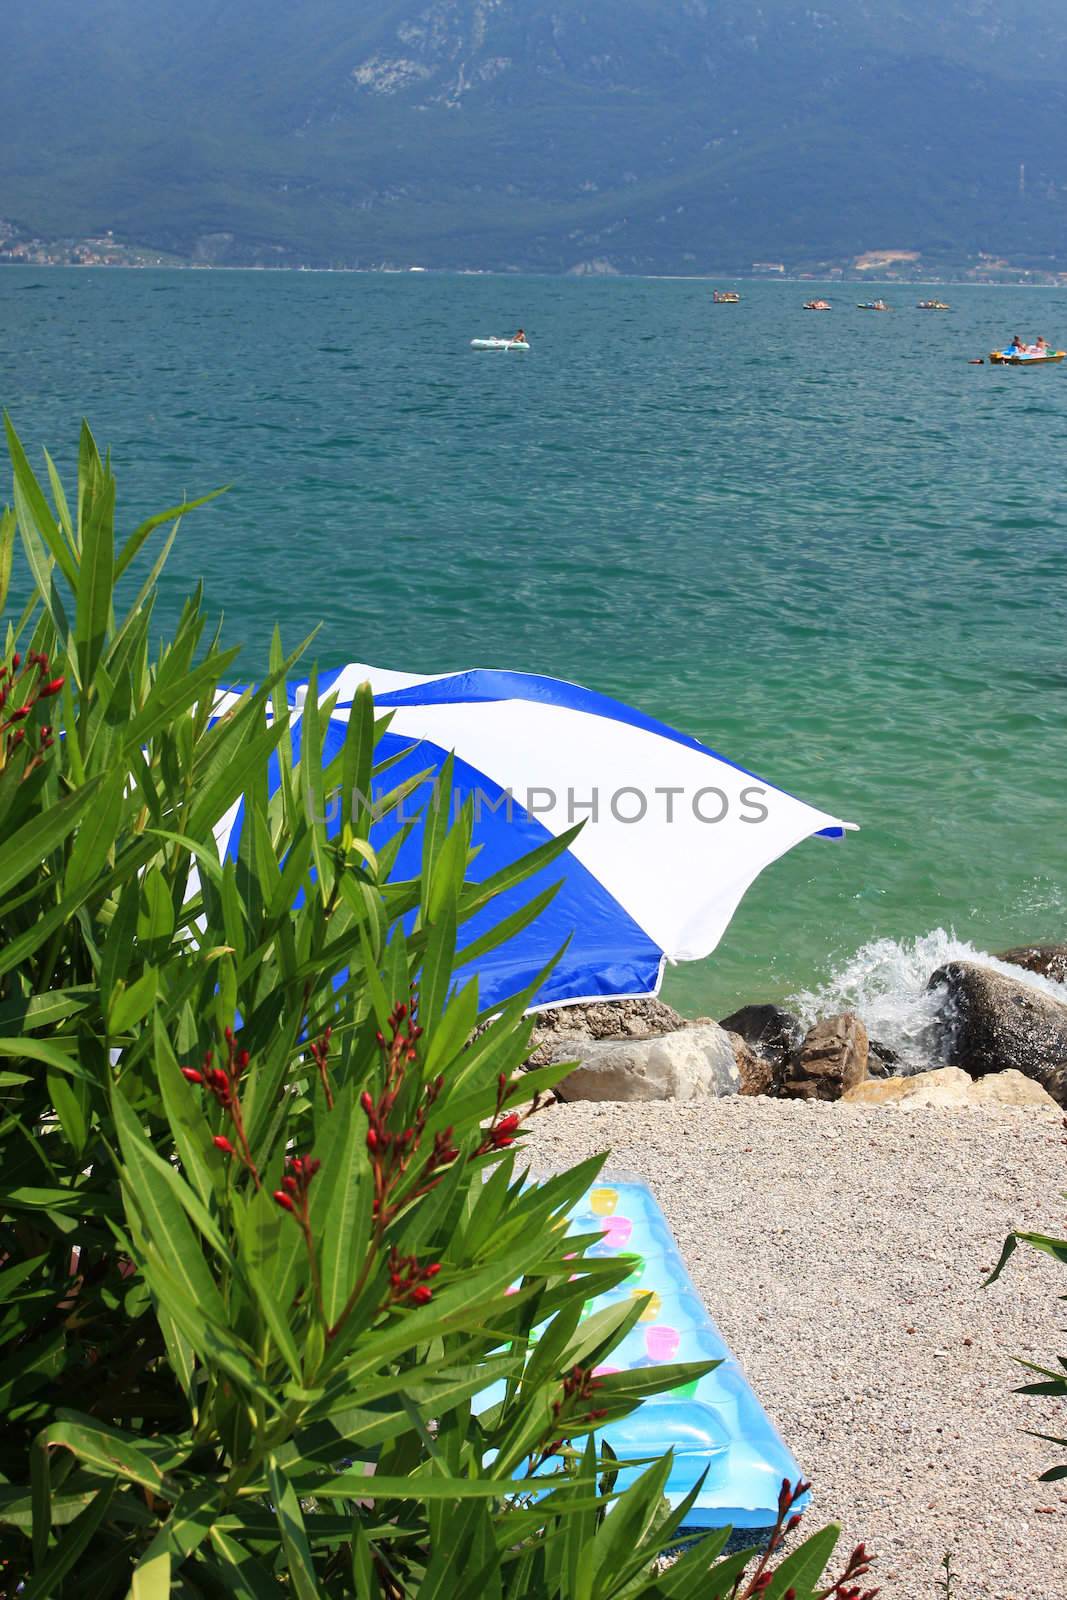 A beach umbrella on a beach at lake garda, colorful inflateable matress on the sand, fantastic holiday or vacation image,